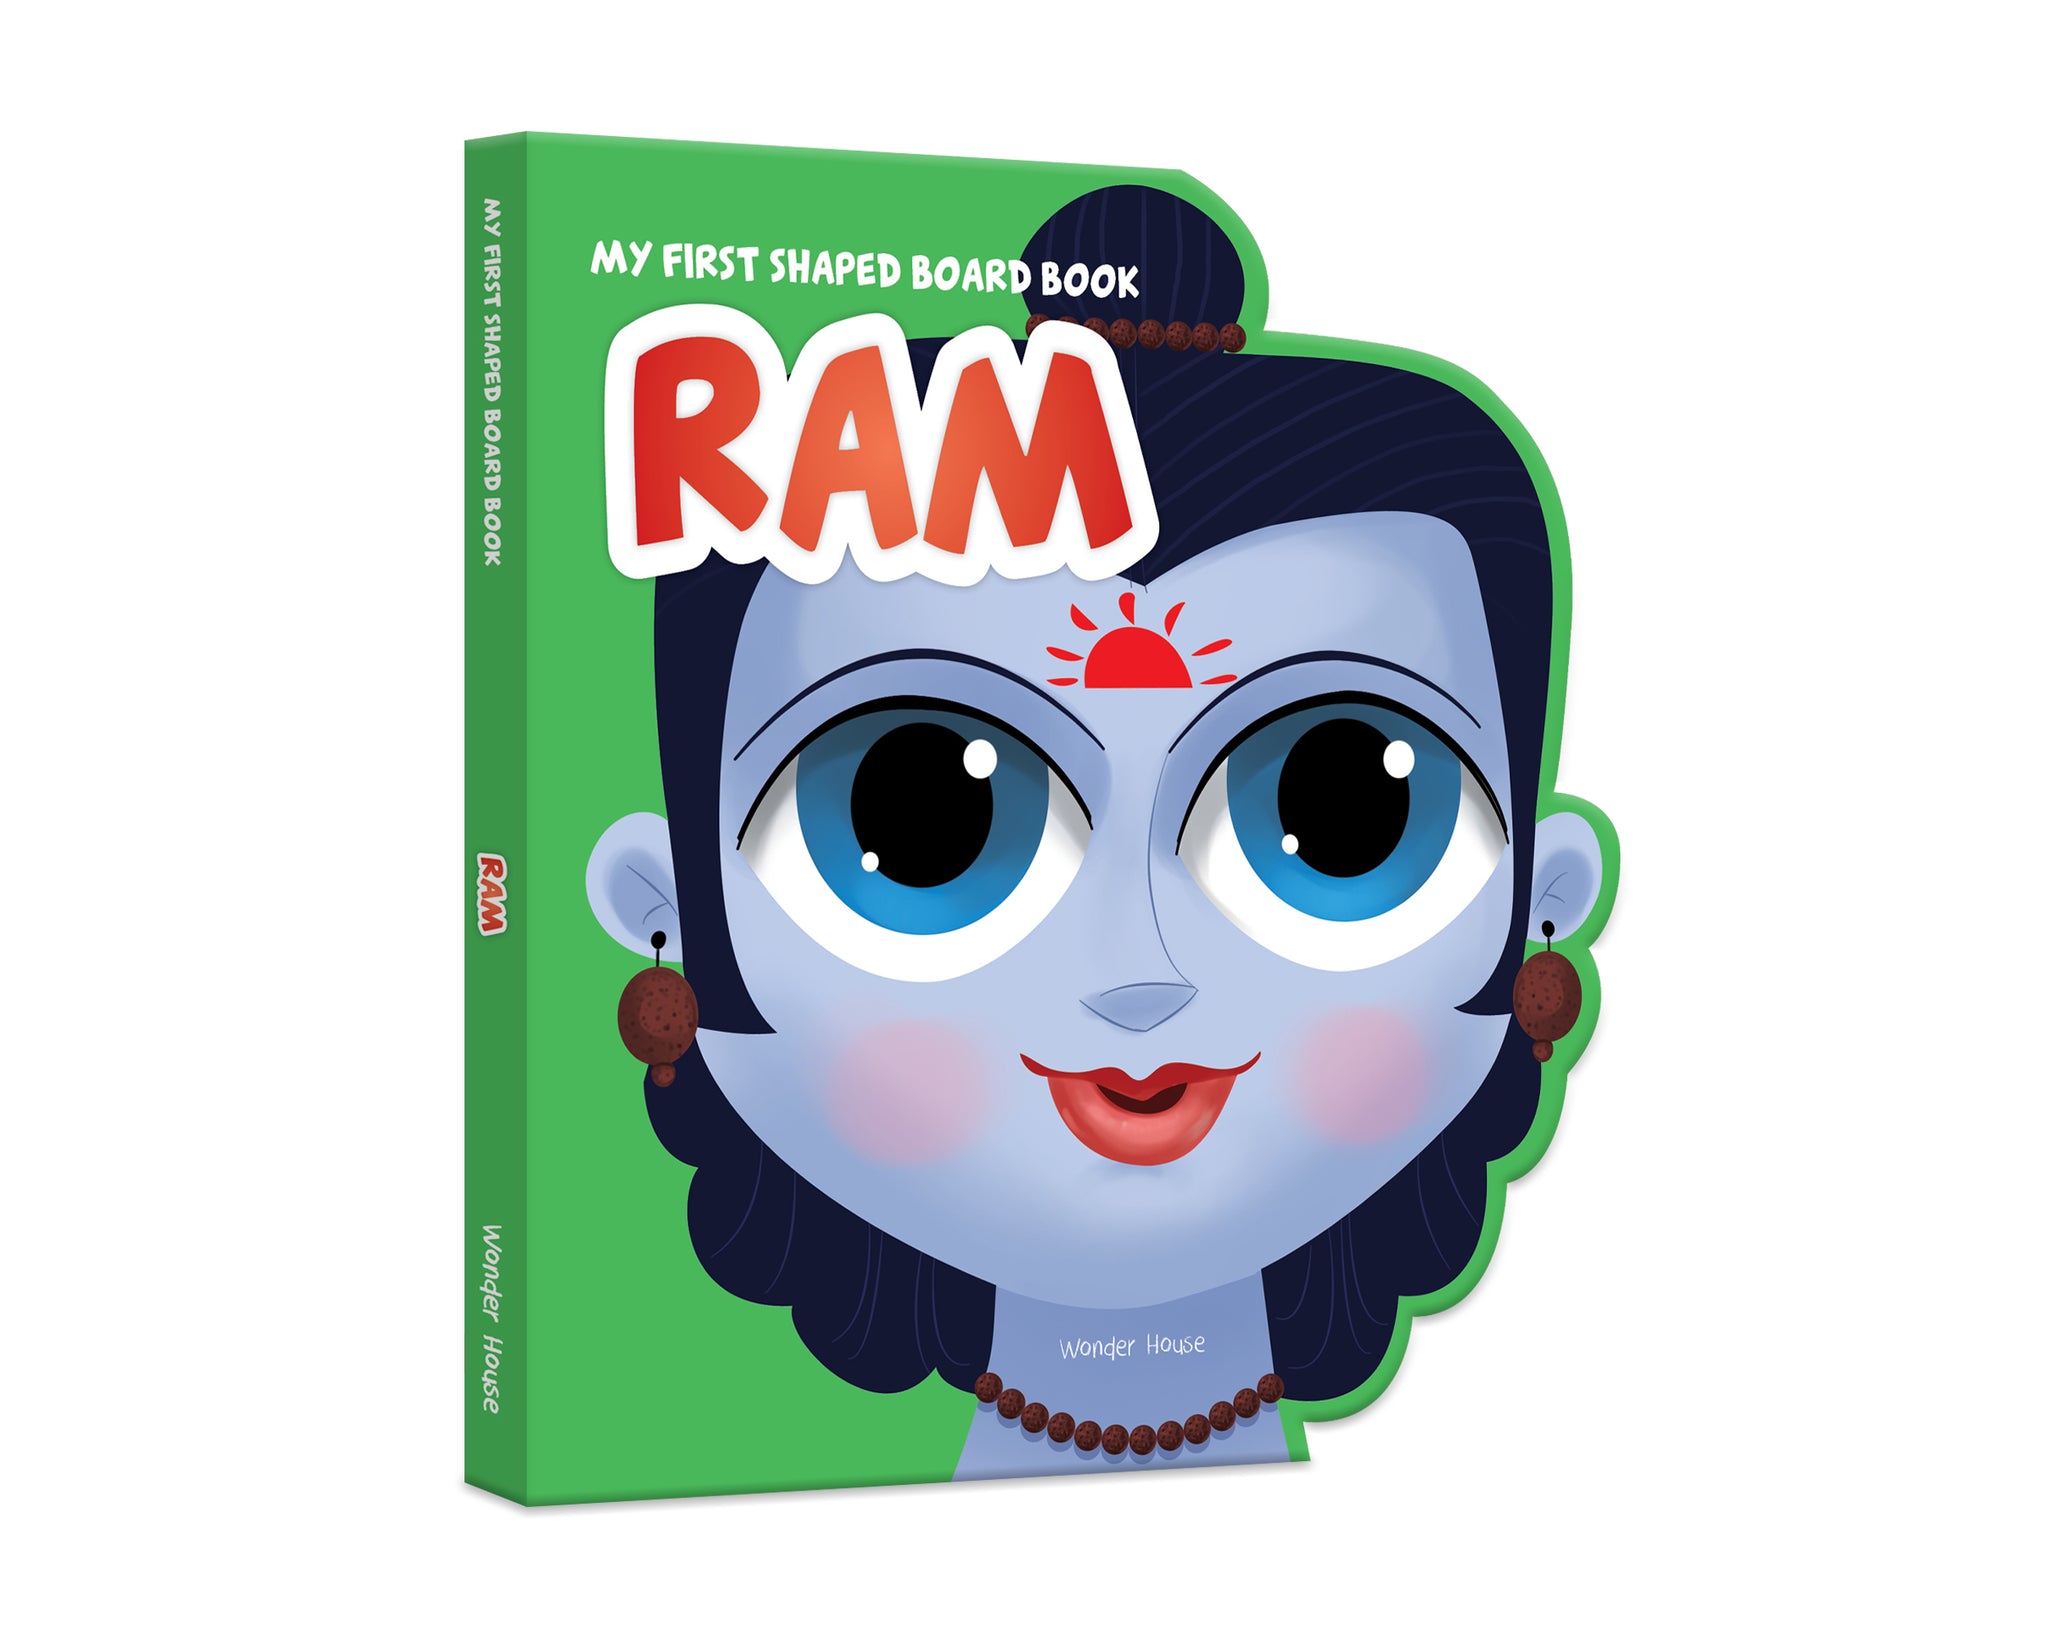 My First Shaped Board Book: Illustrated Ram Hindu Mythology Book for Kids Age 2+ (Indian Gods and Goddesses)